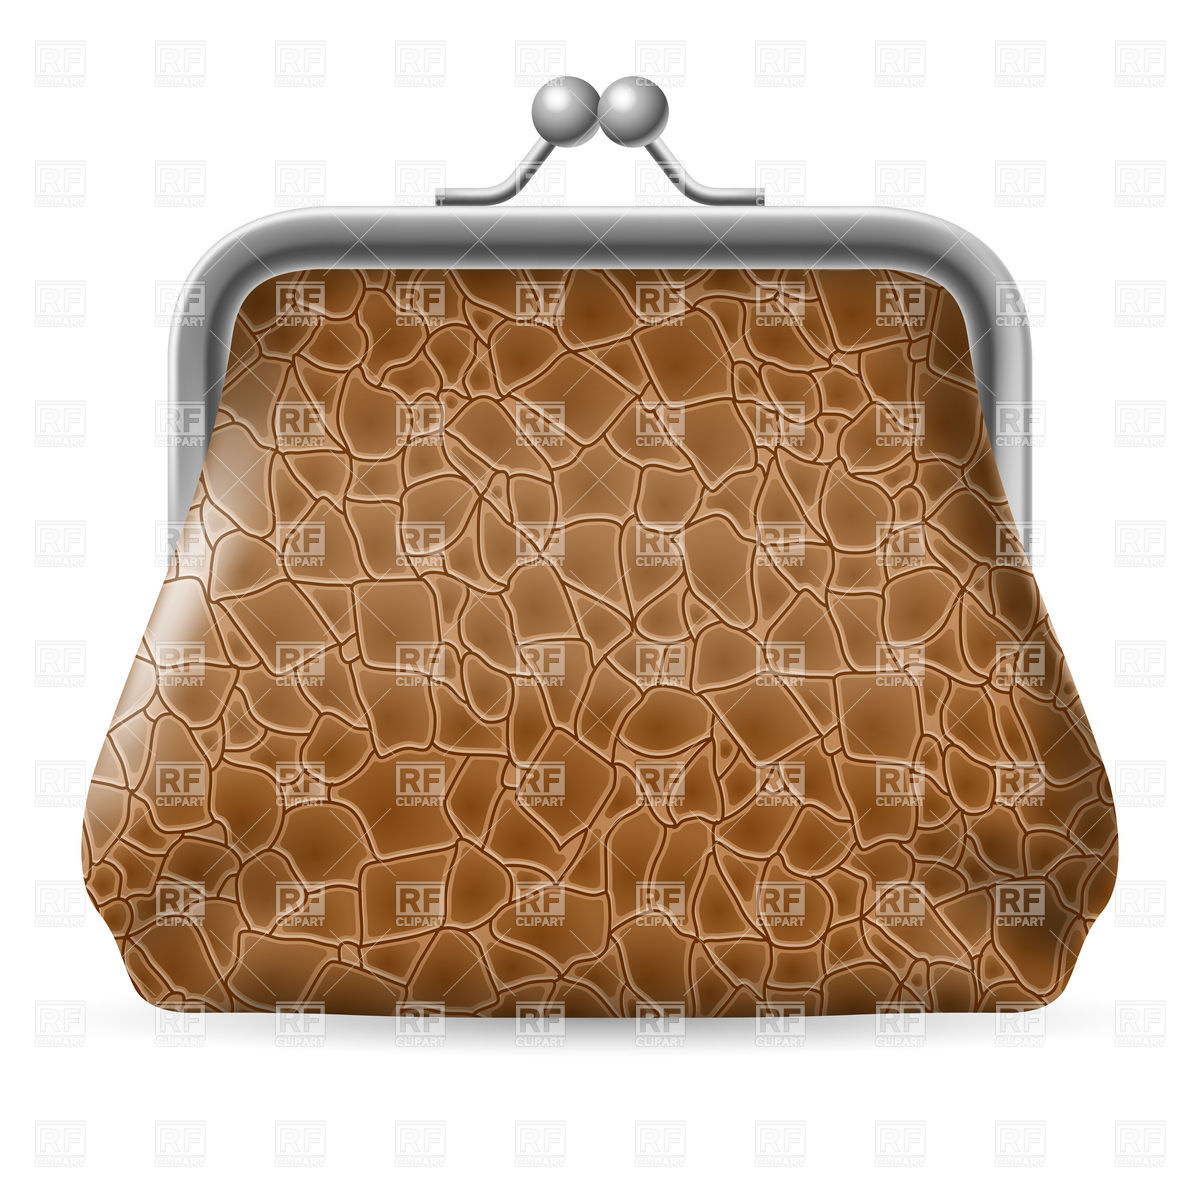     Purse 9584 Beauty Fashion Download Royalty Free Vector Clipart